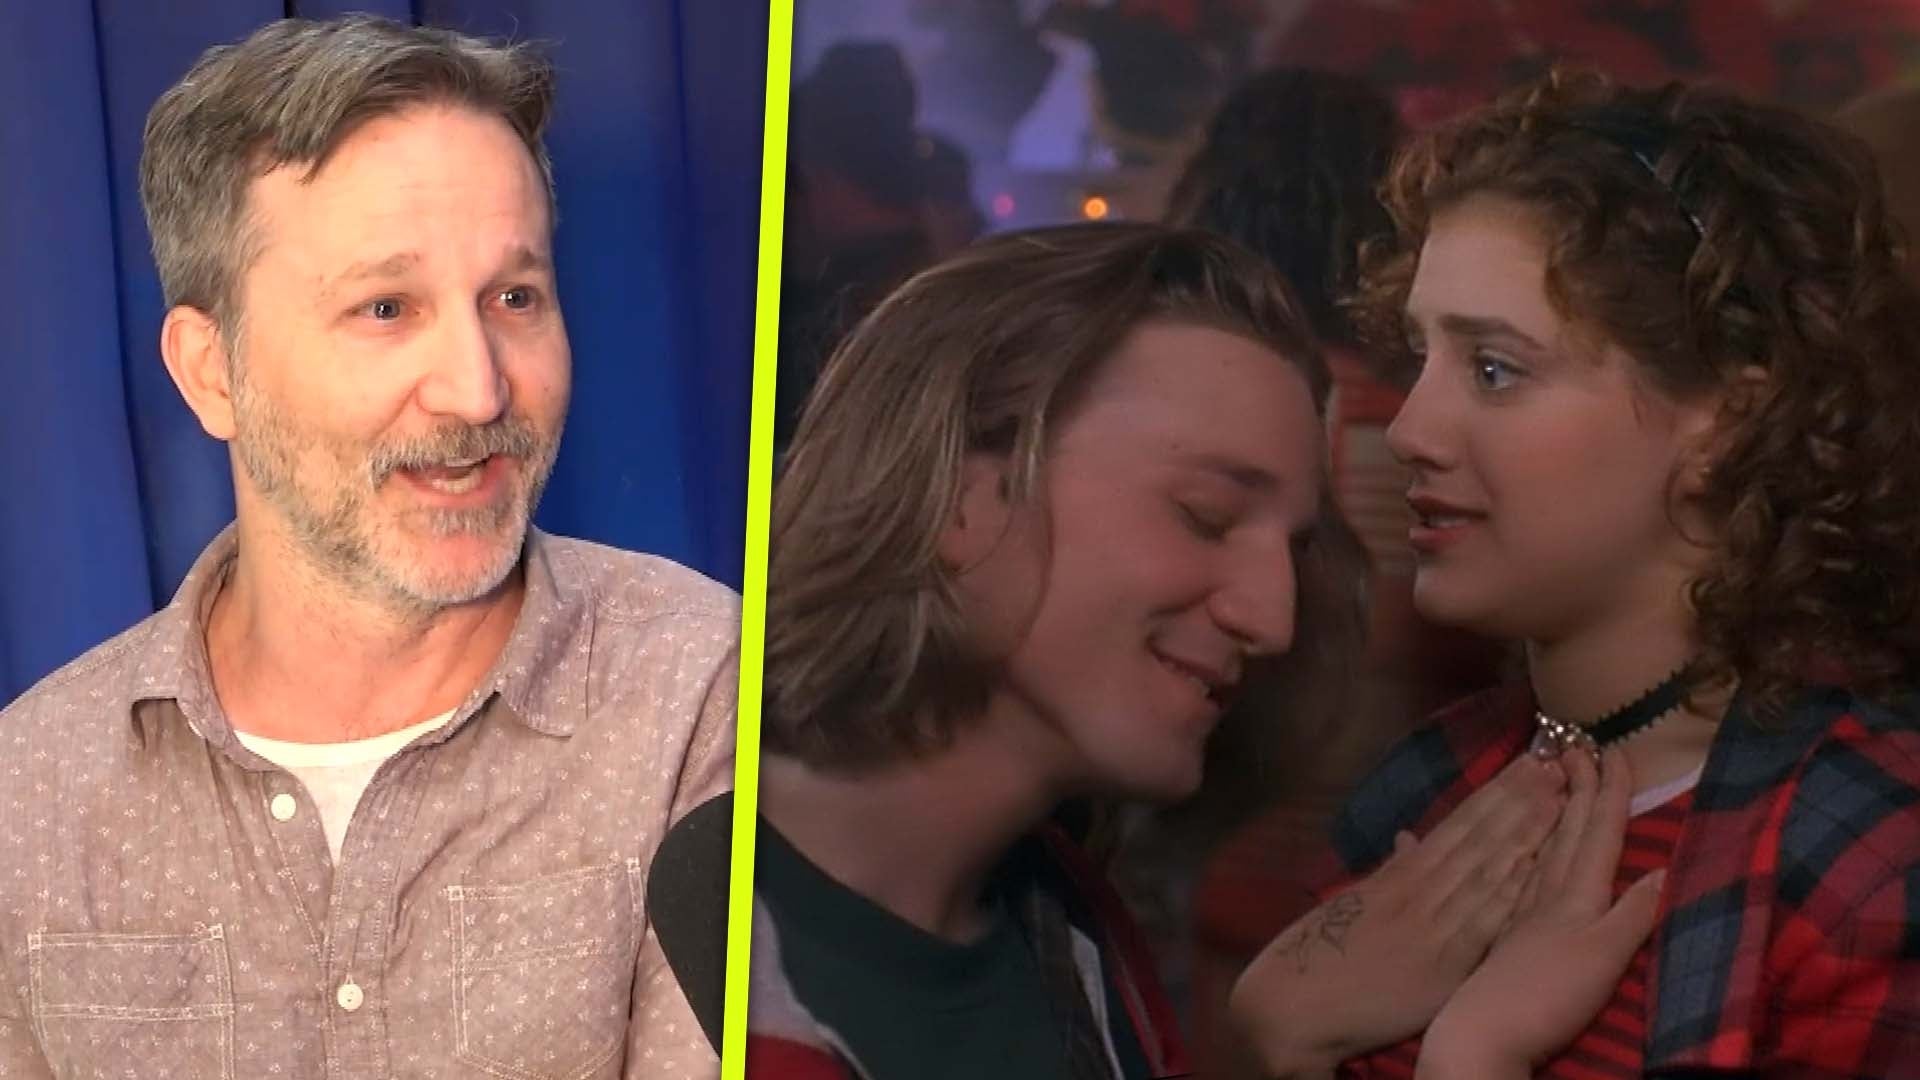 Breckin Meyer Reflects on Untimely Death of ‘Clueless’ Co-Star Brittany Murphy